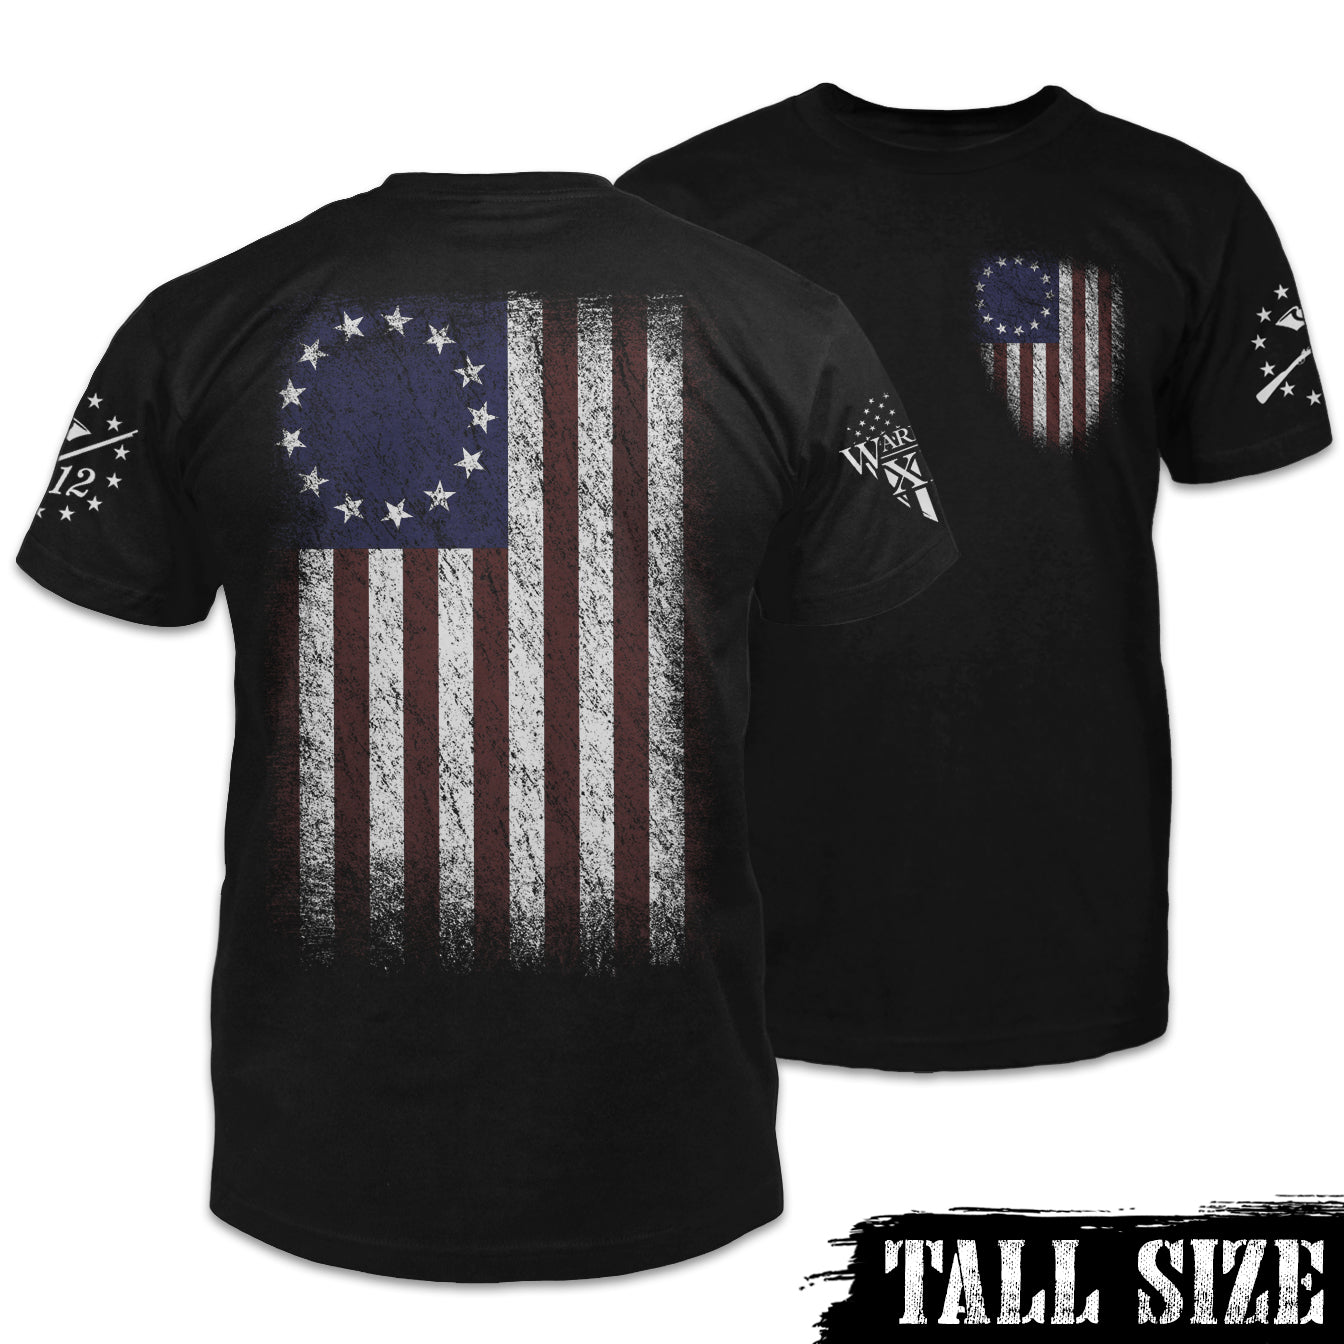 Front and back tall size shirt with the Betsy Ross flag.